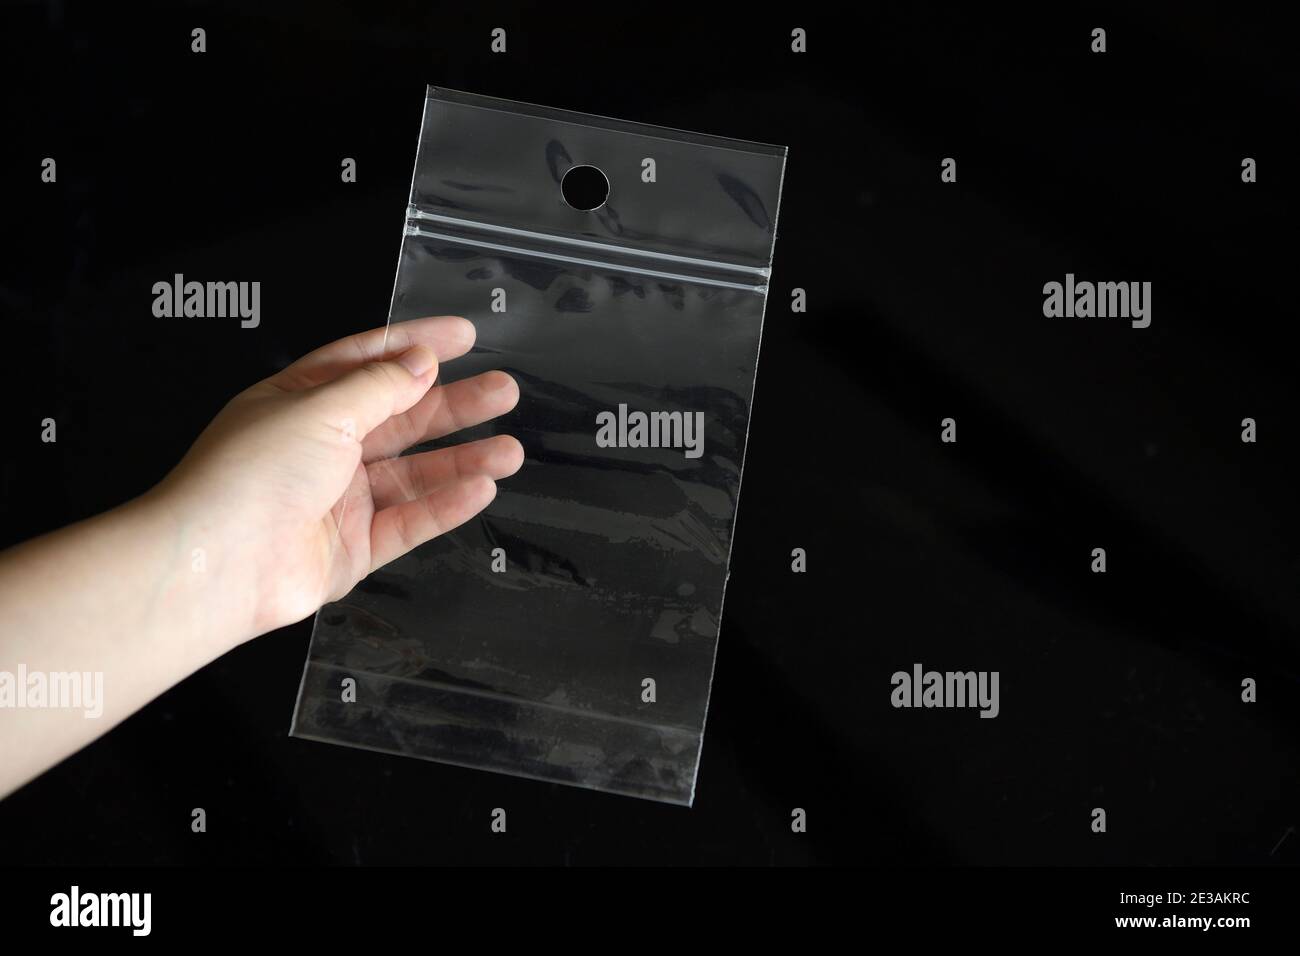 The zipper plastic bag is picked up to show transparency on a black background. Stock Photo